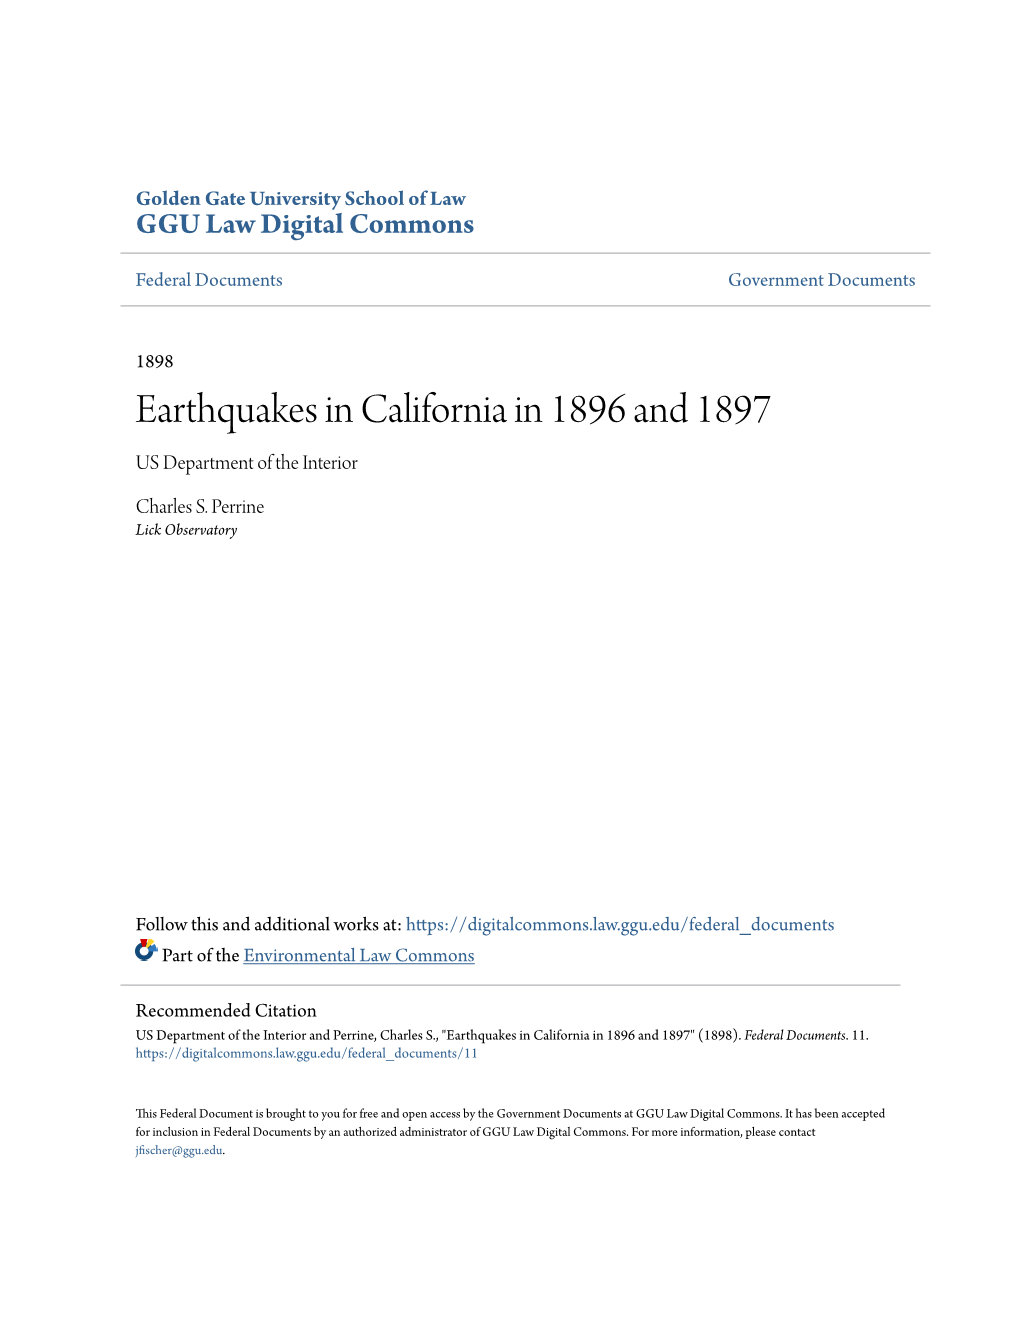 Earthquakes in California in 1896 and 1897 US Department of the Interior